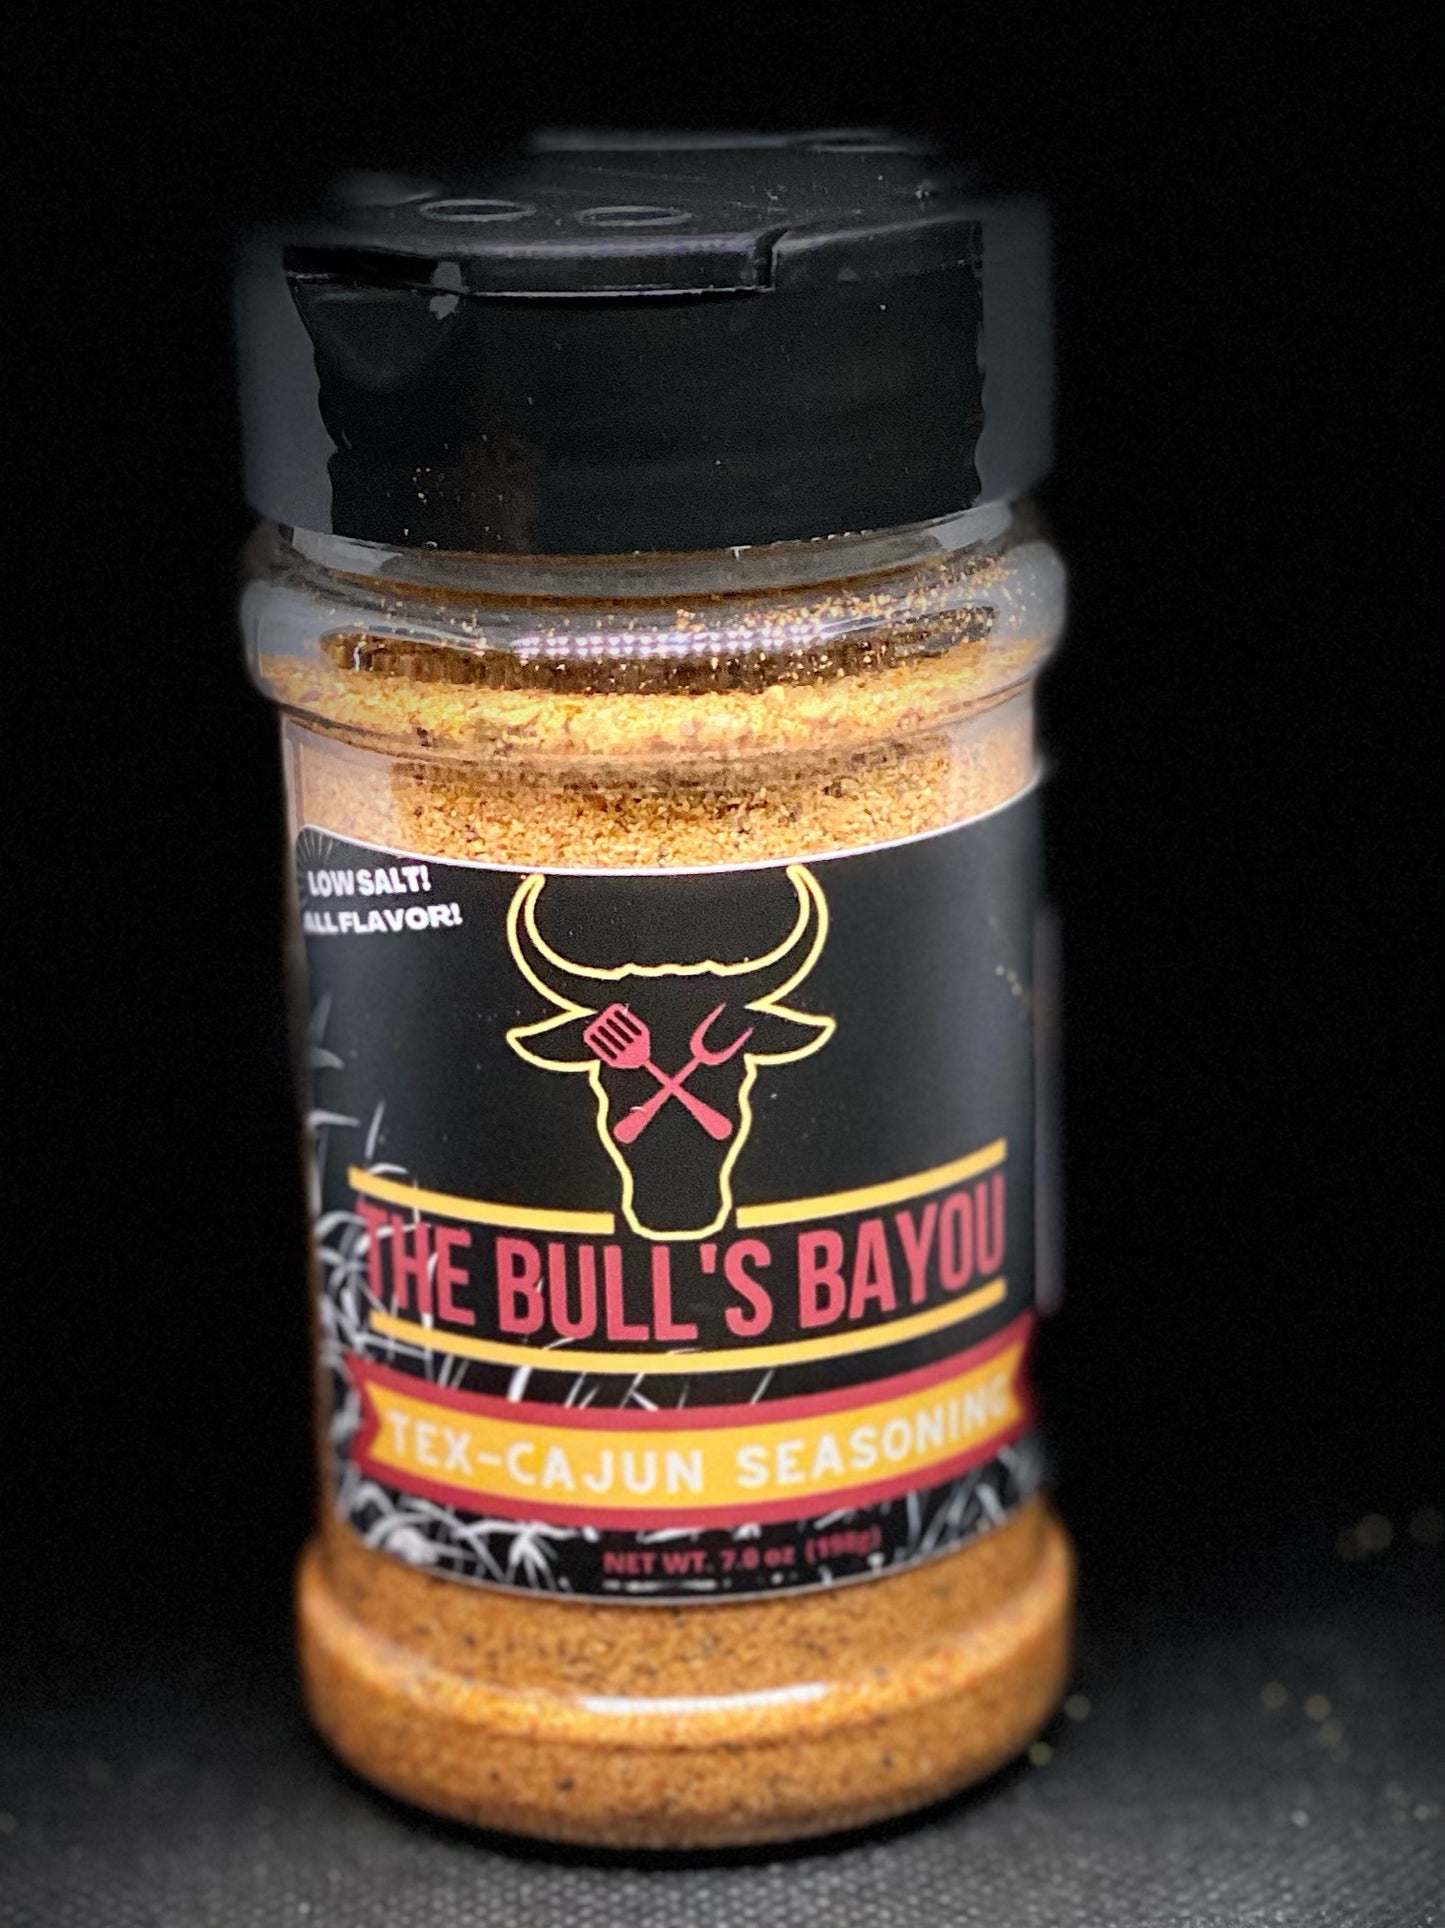 Image of a bottle of All Purpose Cajun Seasoning. The bottle has a black top with red text & a yellow outlined logo. The text on the bottle includes the product name, product description, ingredients, nutritional information, price, shipping information, social media links, and call to action.